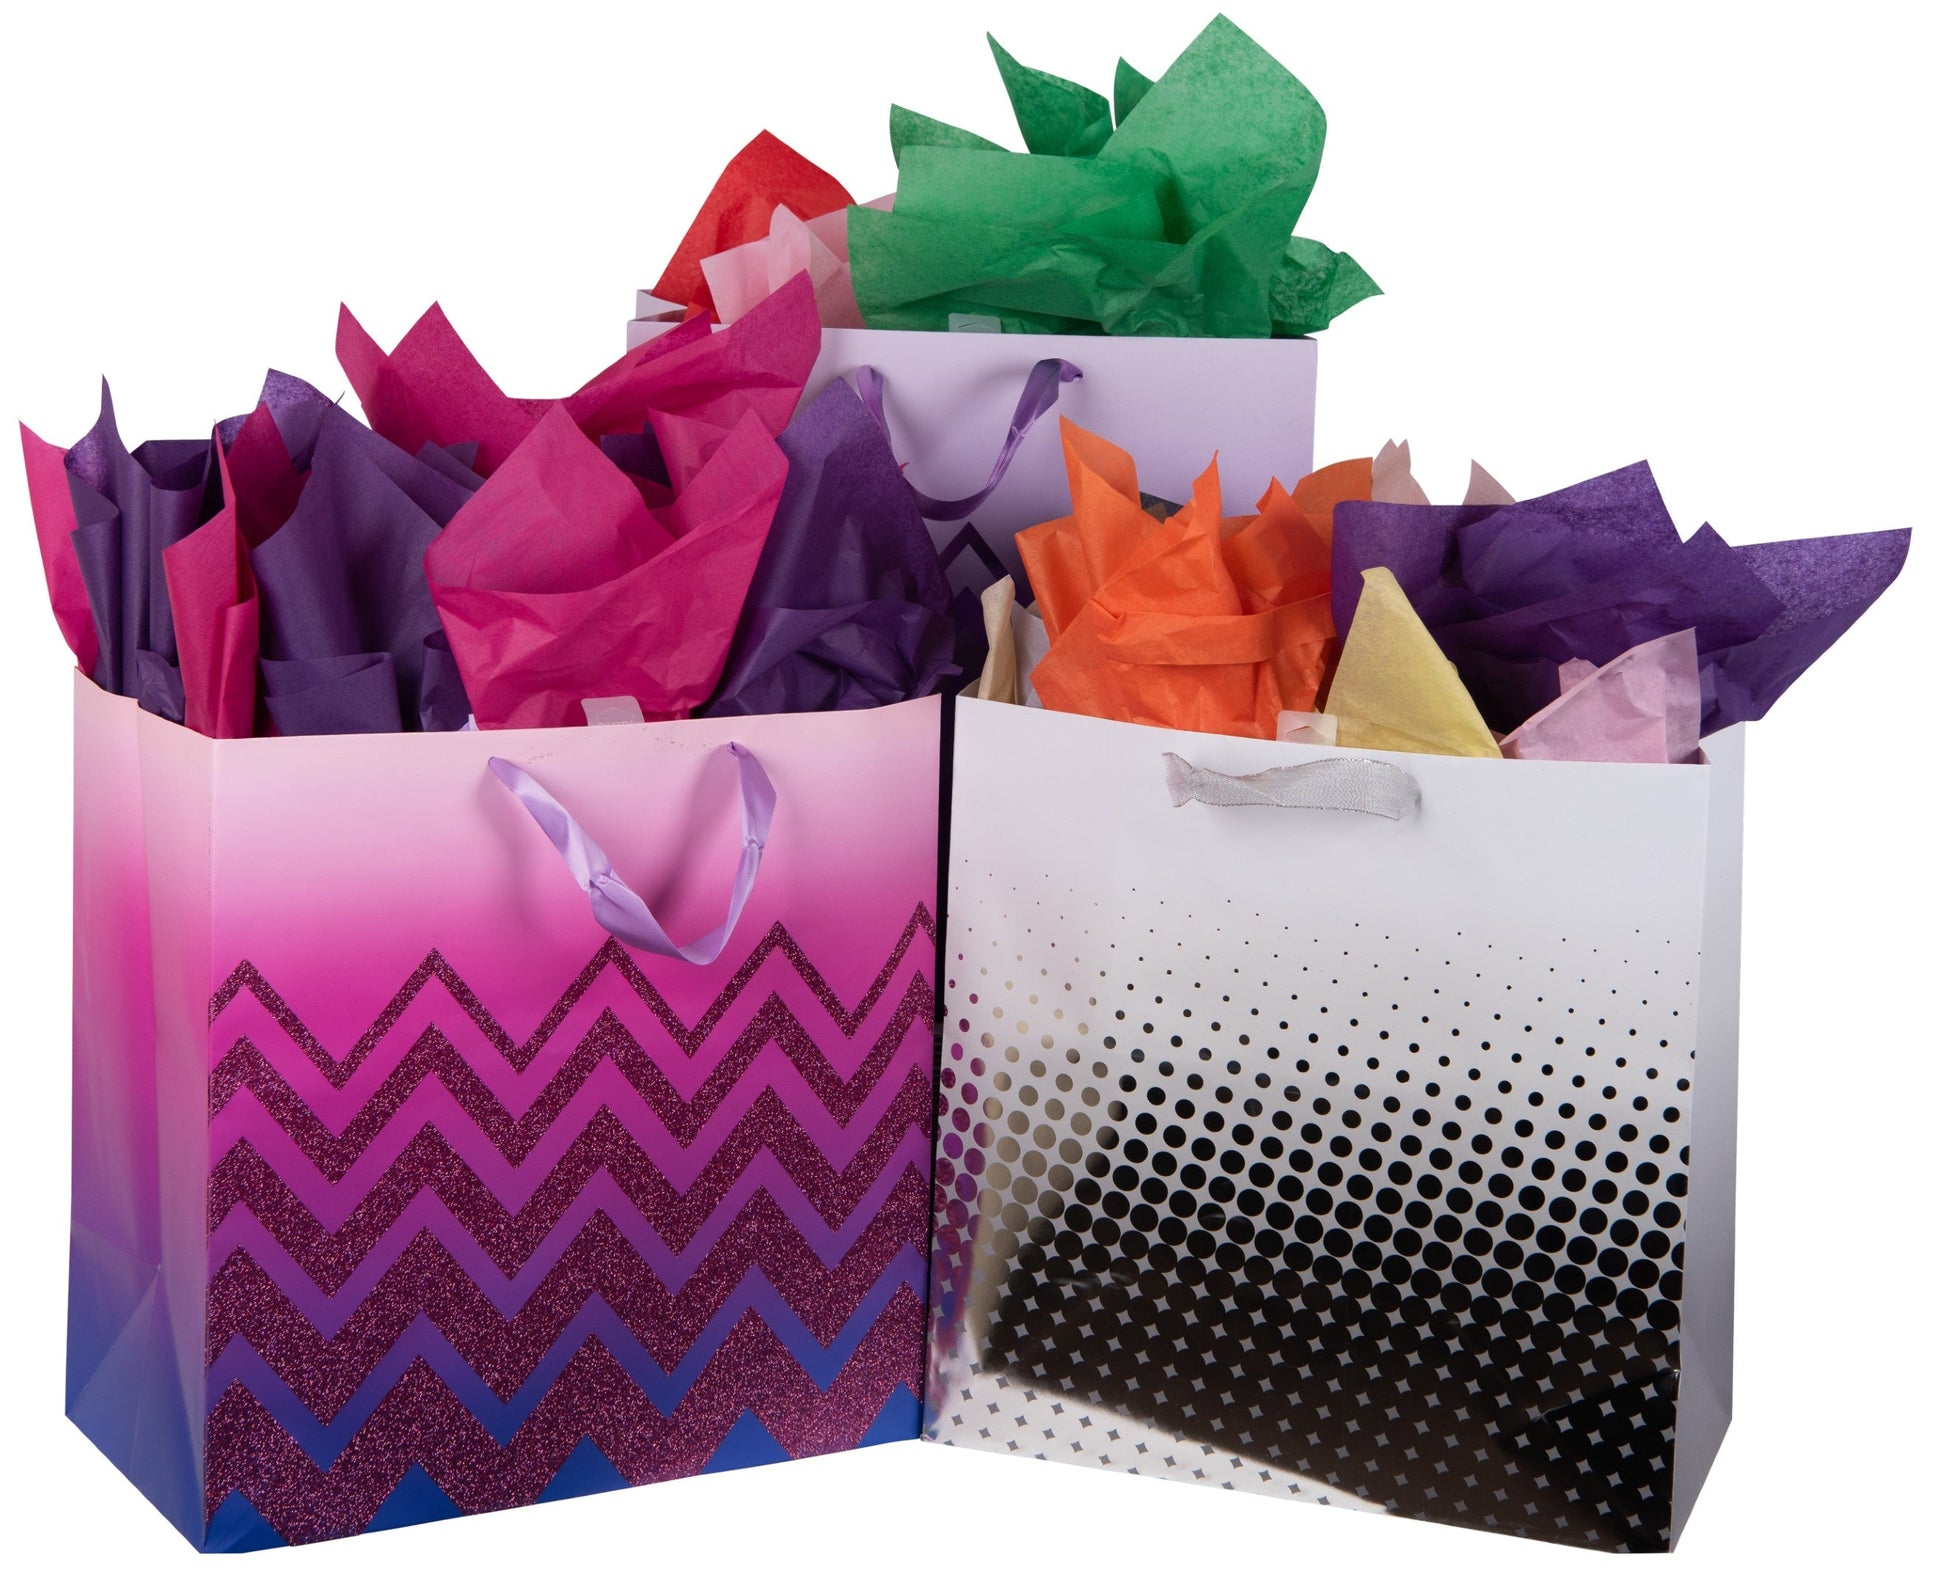 Pink Tissue Paper Squares, Bulk 480 Sheets, Premium Gift Wrap and